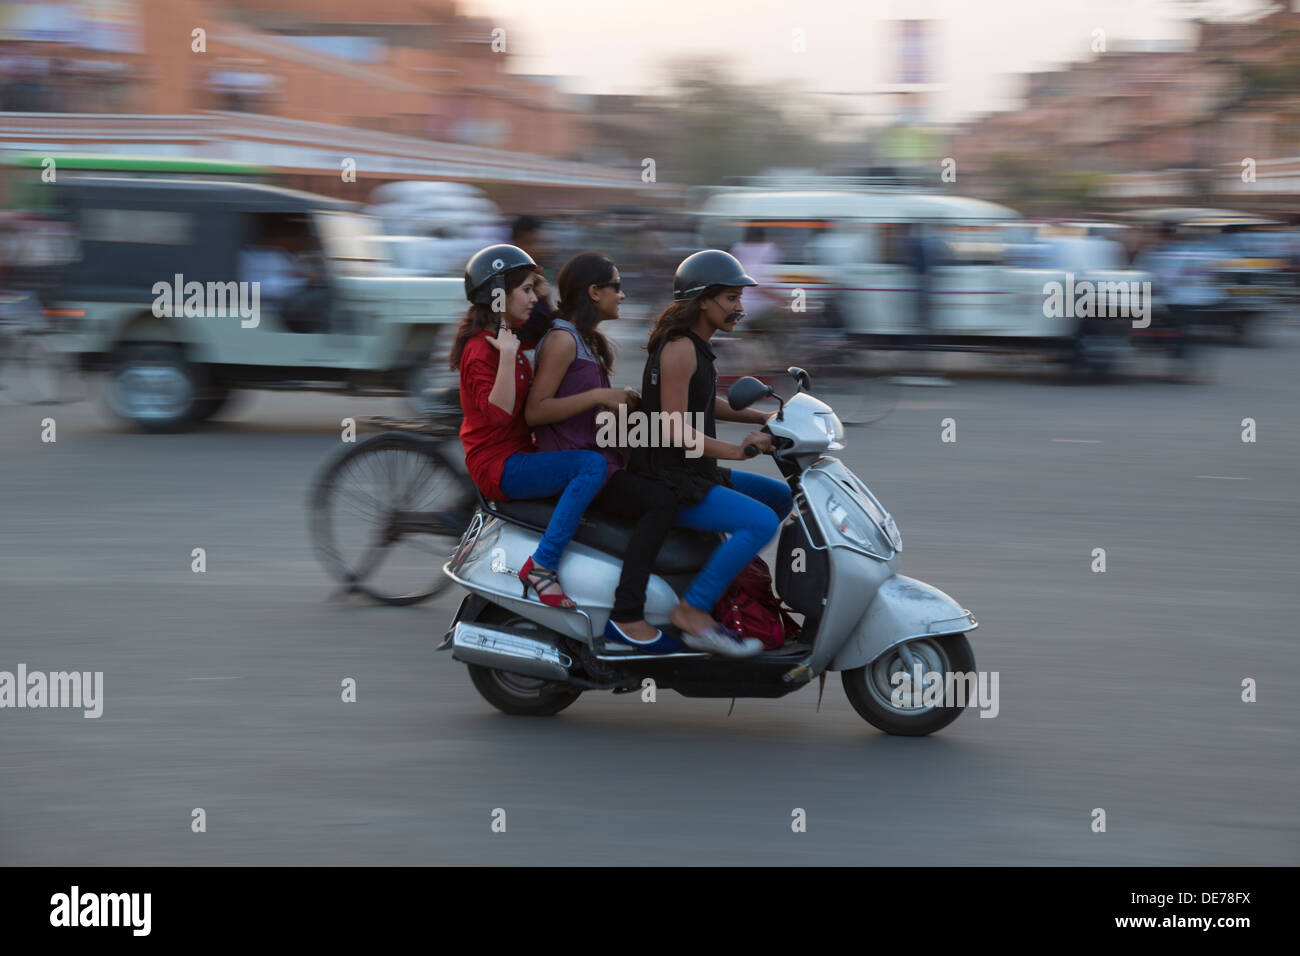 India, Rajasthan, Jaipur, three girls on a scooter in rush hour traffic. Motion blur effect. Stock Photo